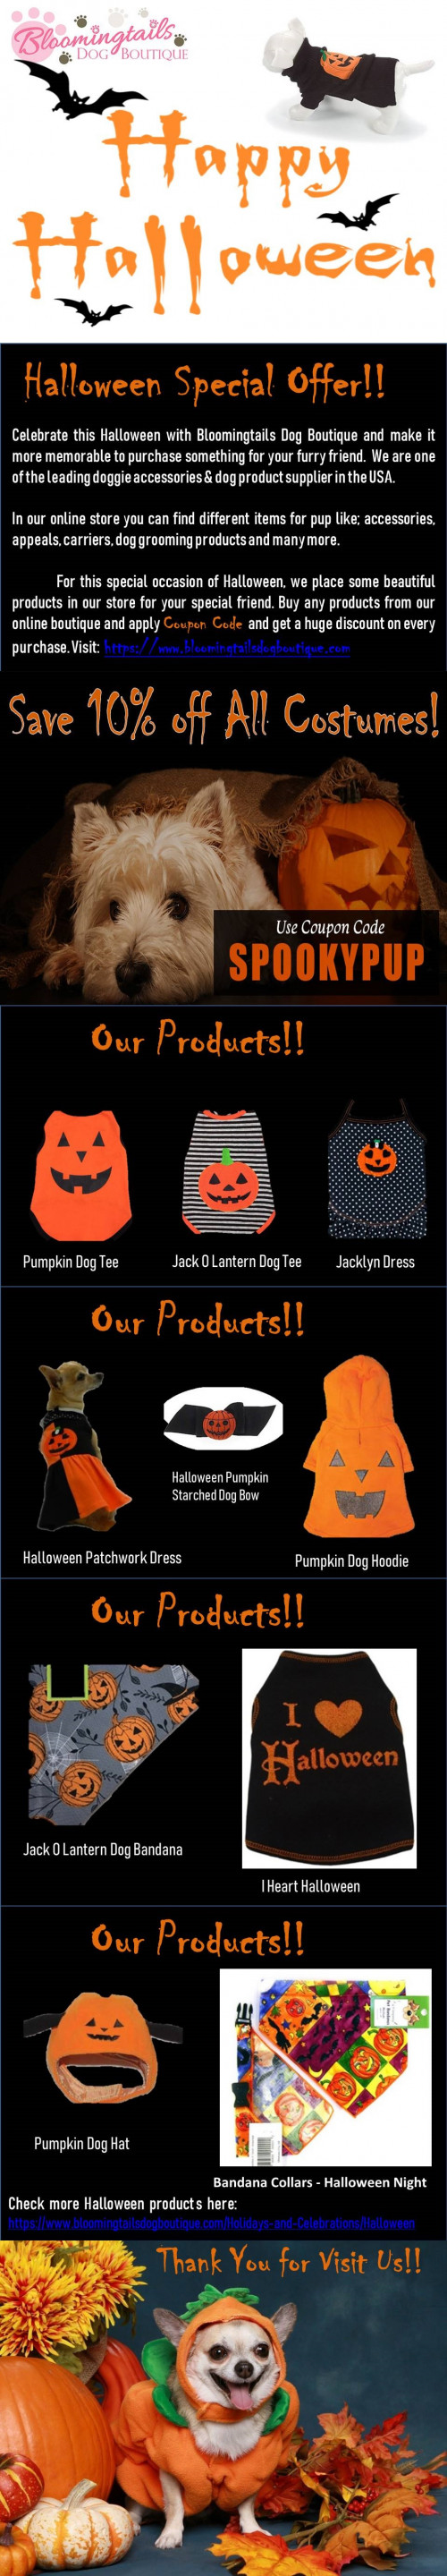 HALLOWEEN-HOLIDAY-SHOPPING---Bloomingtails-Dog-Boutique.jpg